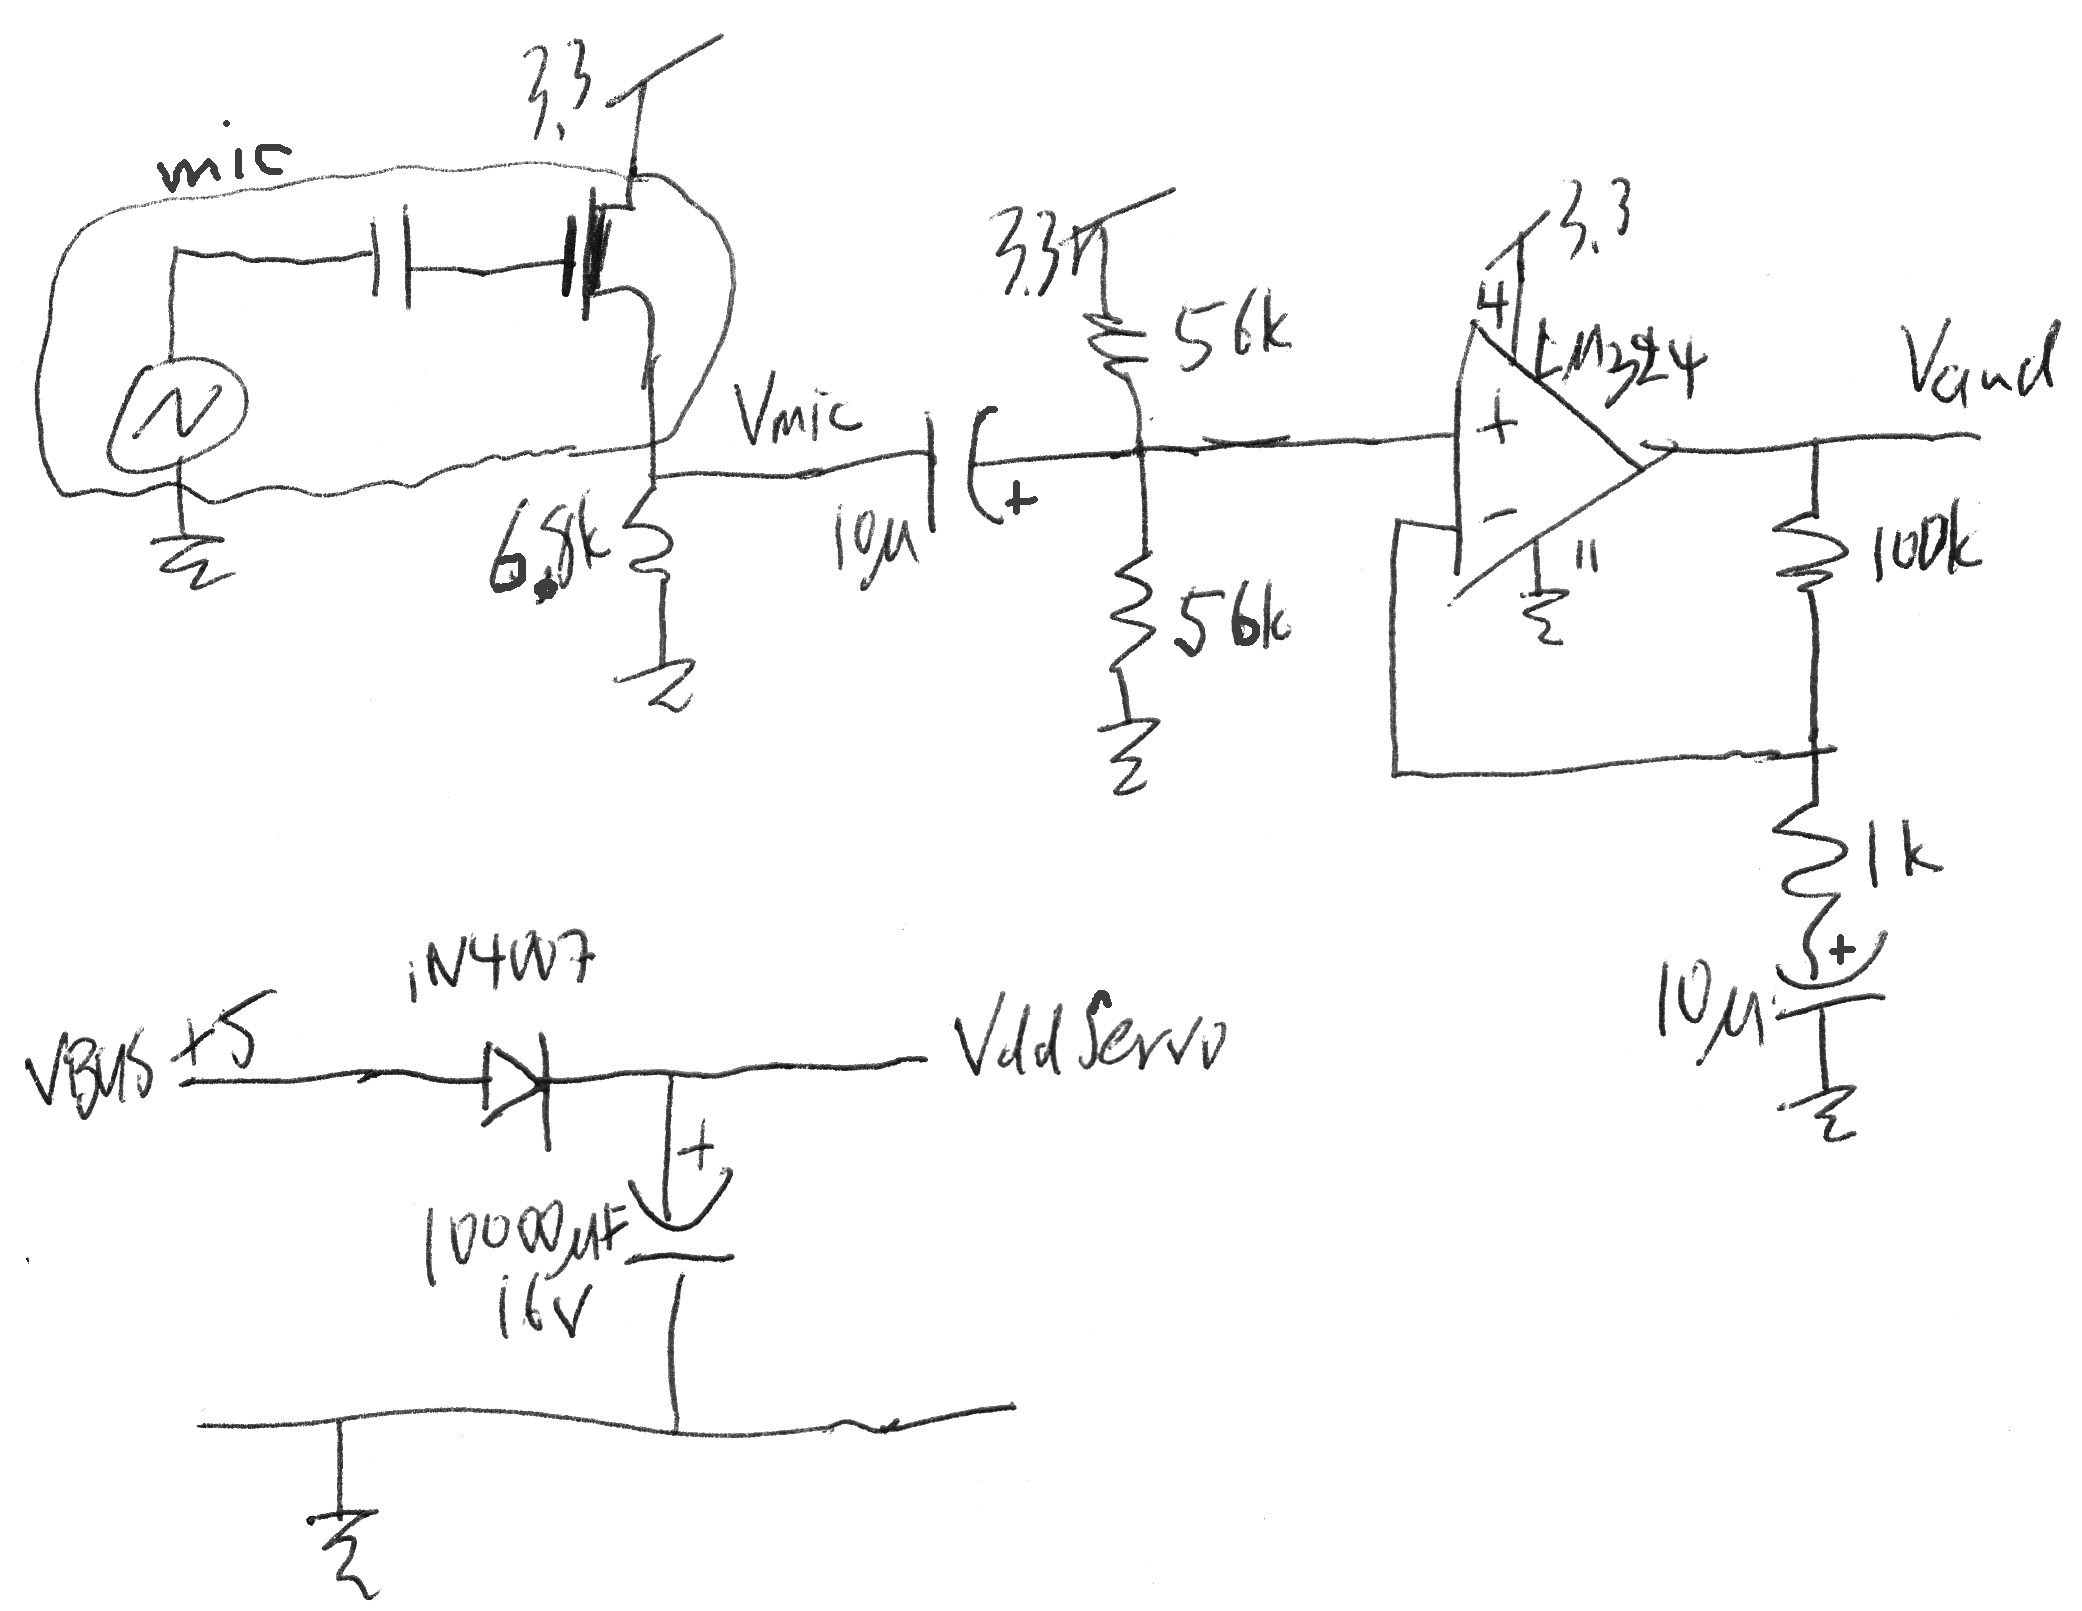 Microphone preamp and servo power supply